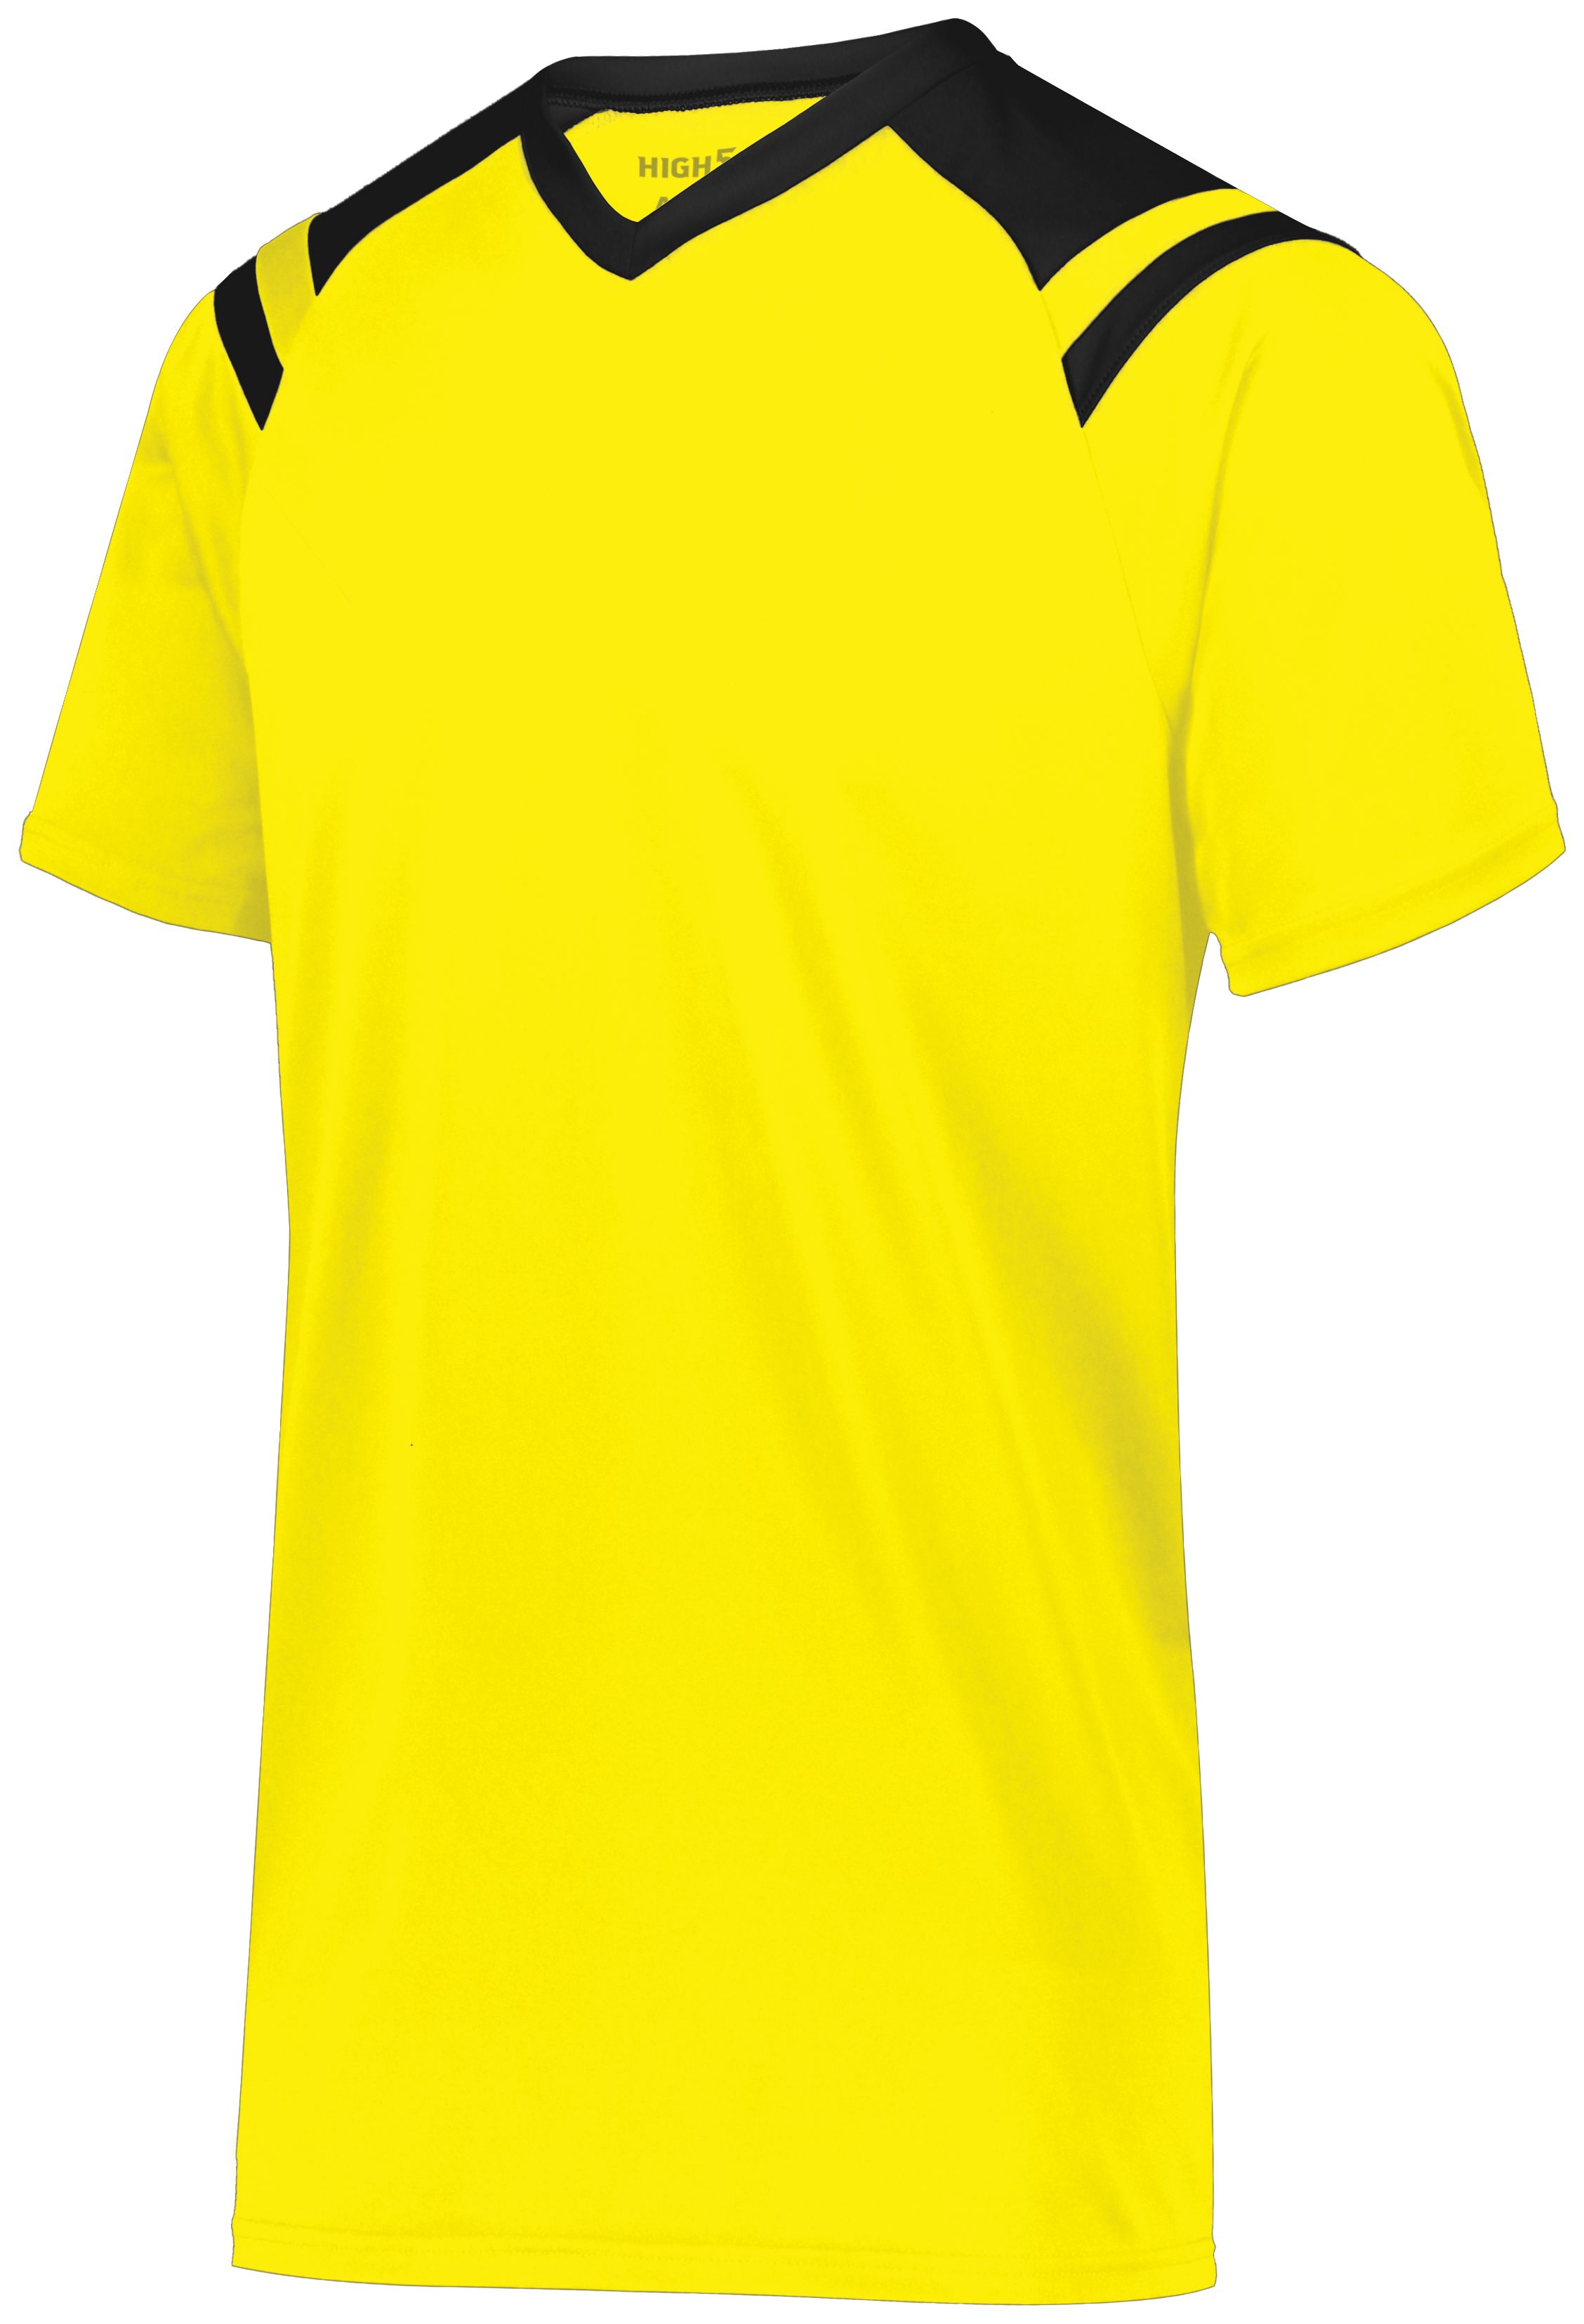 click to view Electric Yellow/Black